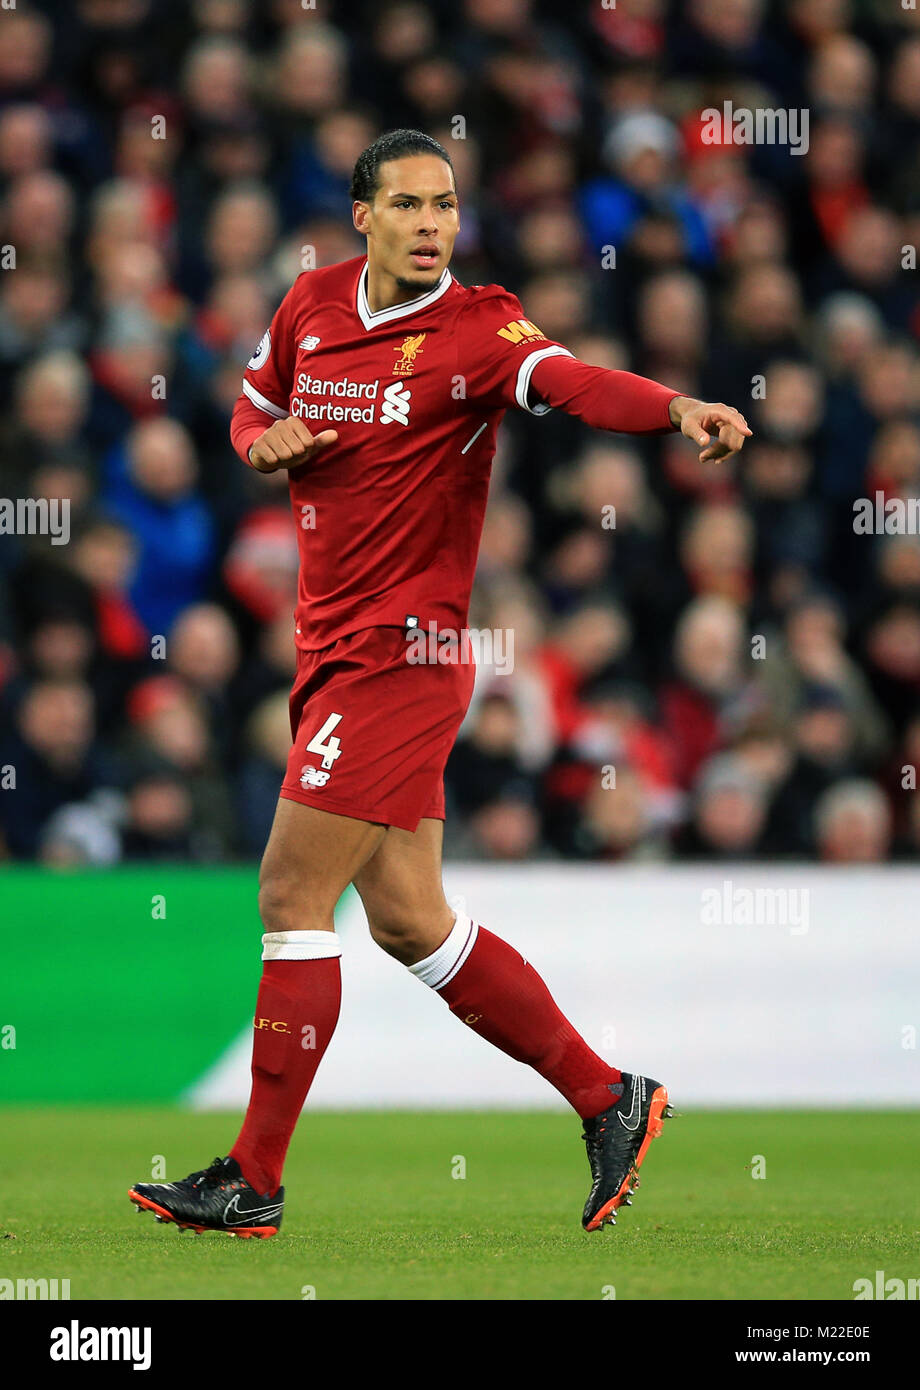 Liverpool's Virgil van Dijk during the Premier League match at Anfield,  Liverpool. PRESS ASSOCIATION Photo. Picture date: Sunday February 4, 2018.  See PA story SOCCER Liverpool. Photo credit should read: Peter Byrne/PA